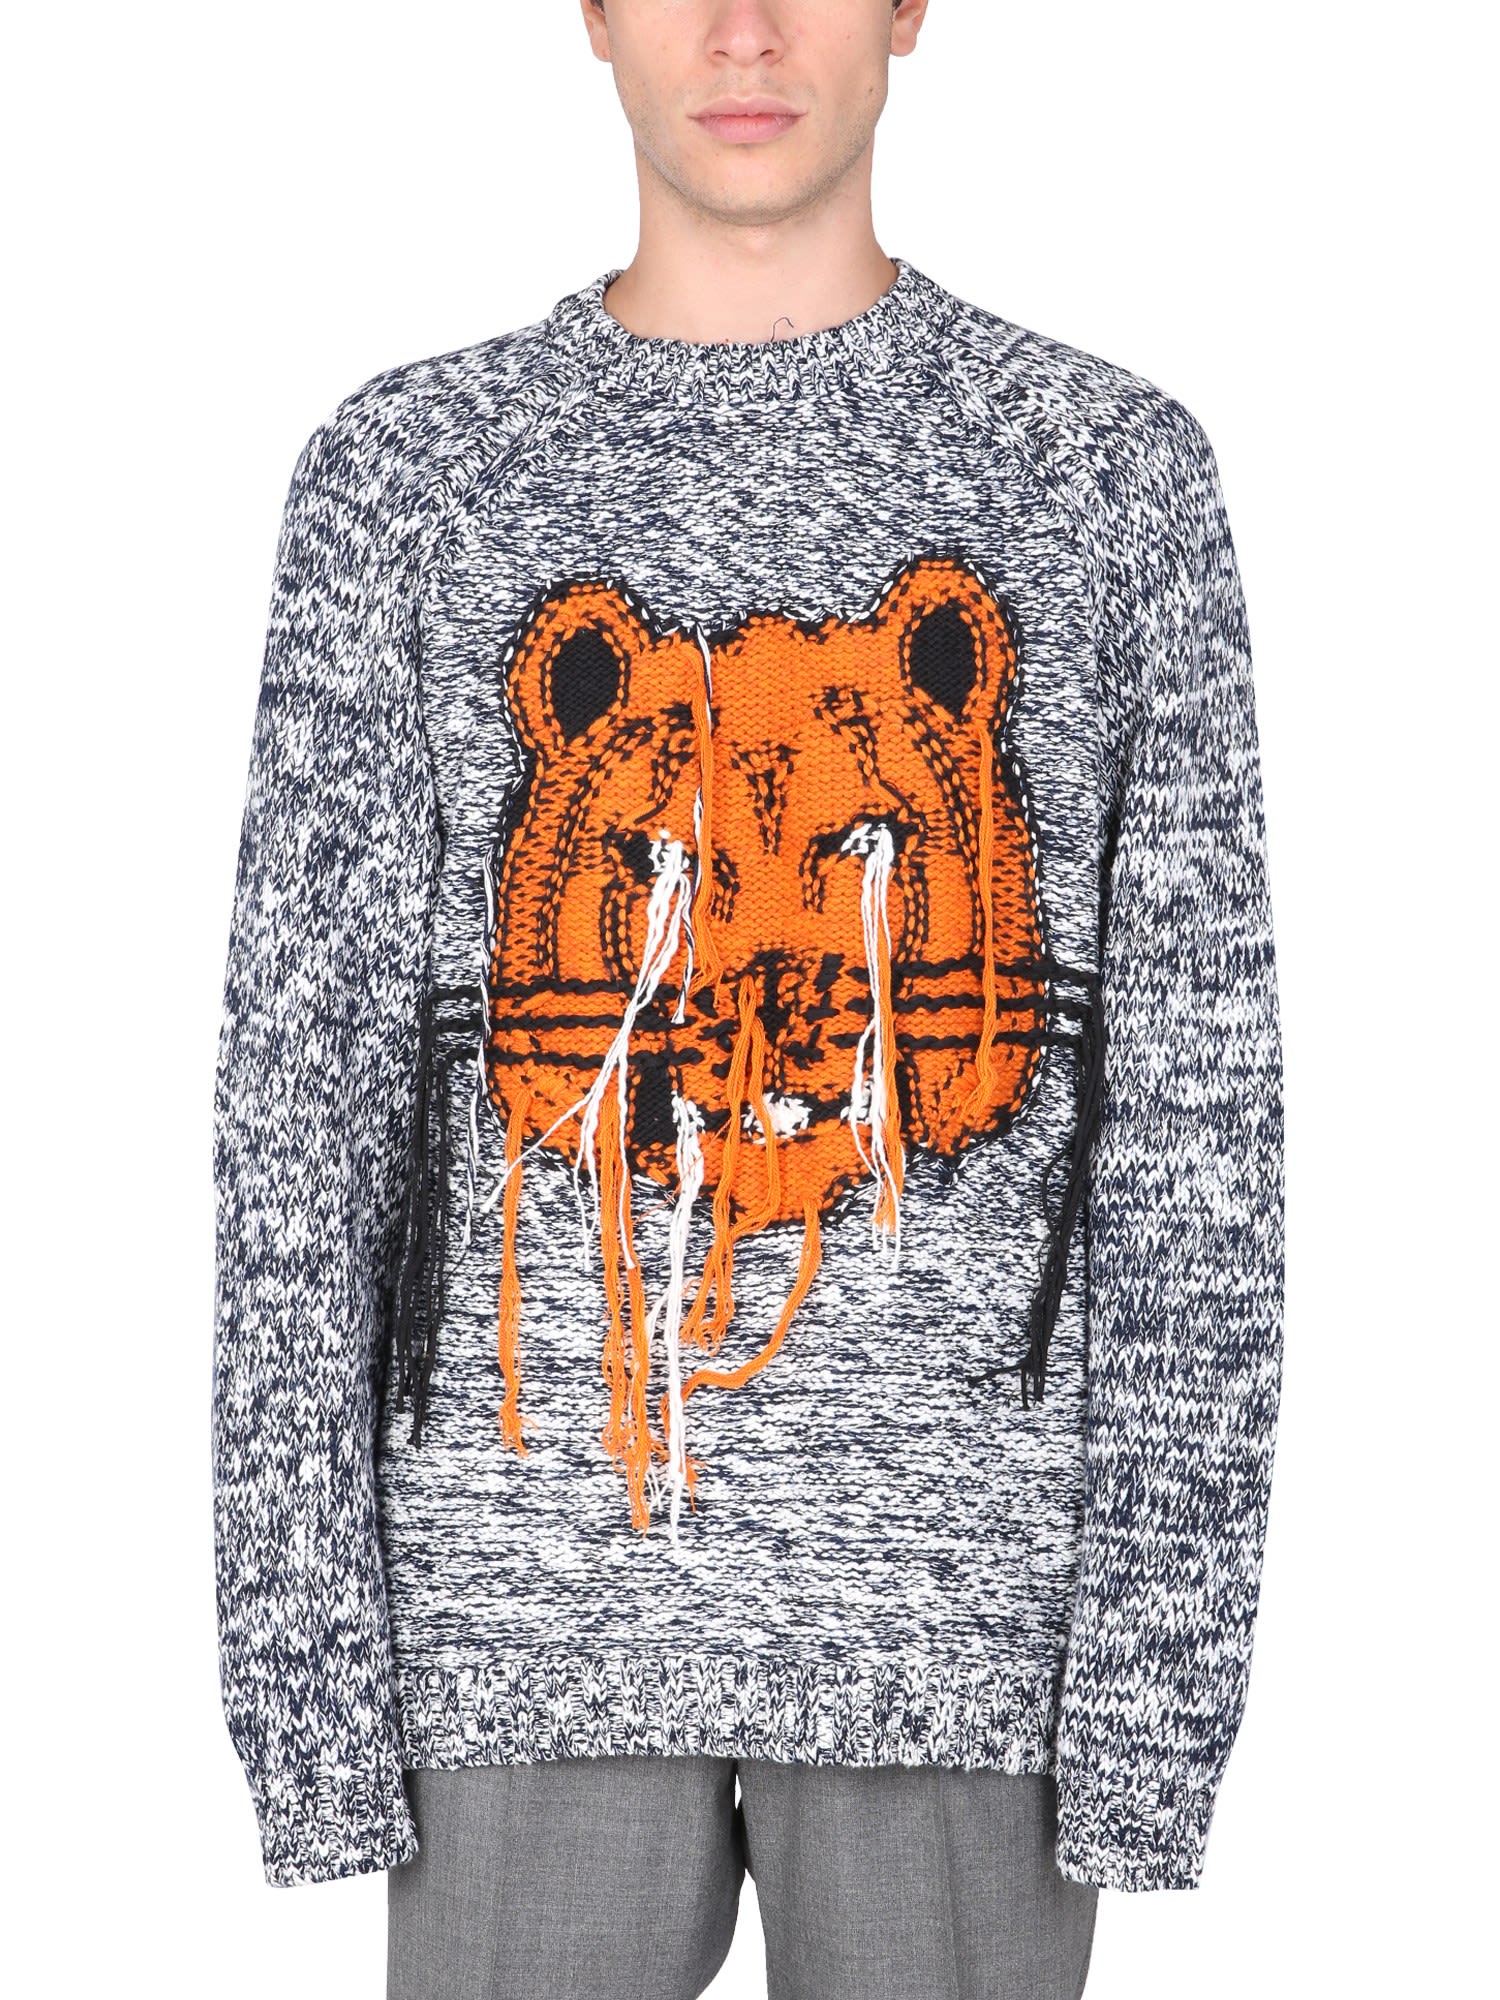 Kenzo Crew Neck Sweater With k-tiger Inlay